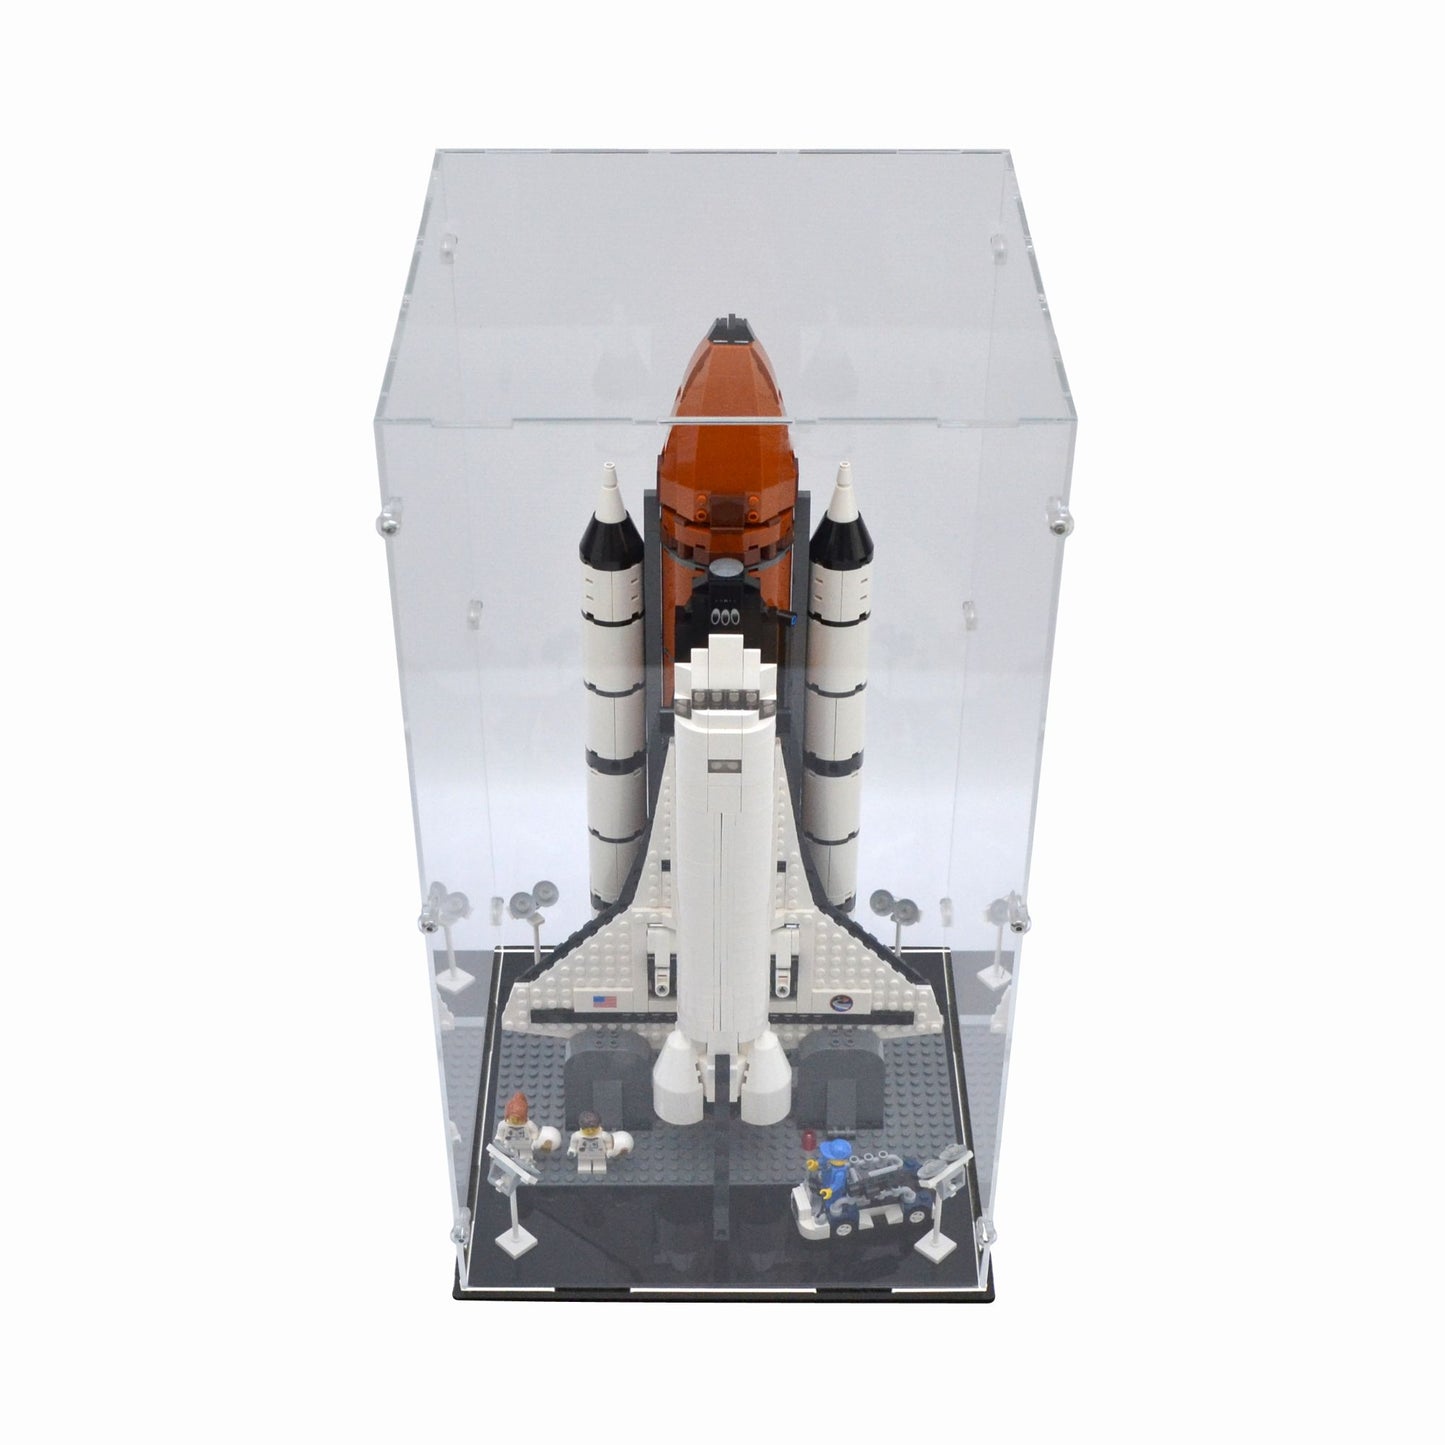 10231 Shuttle Expedition Display Case